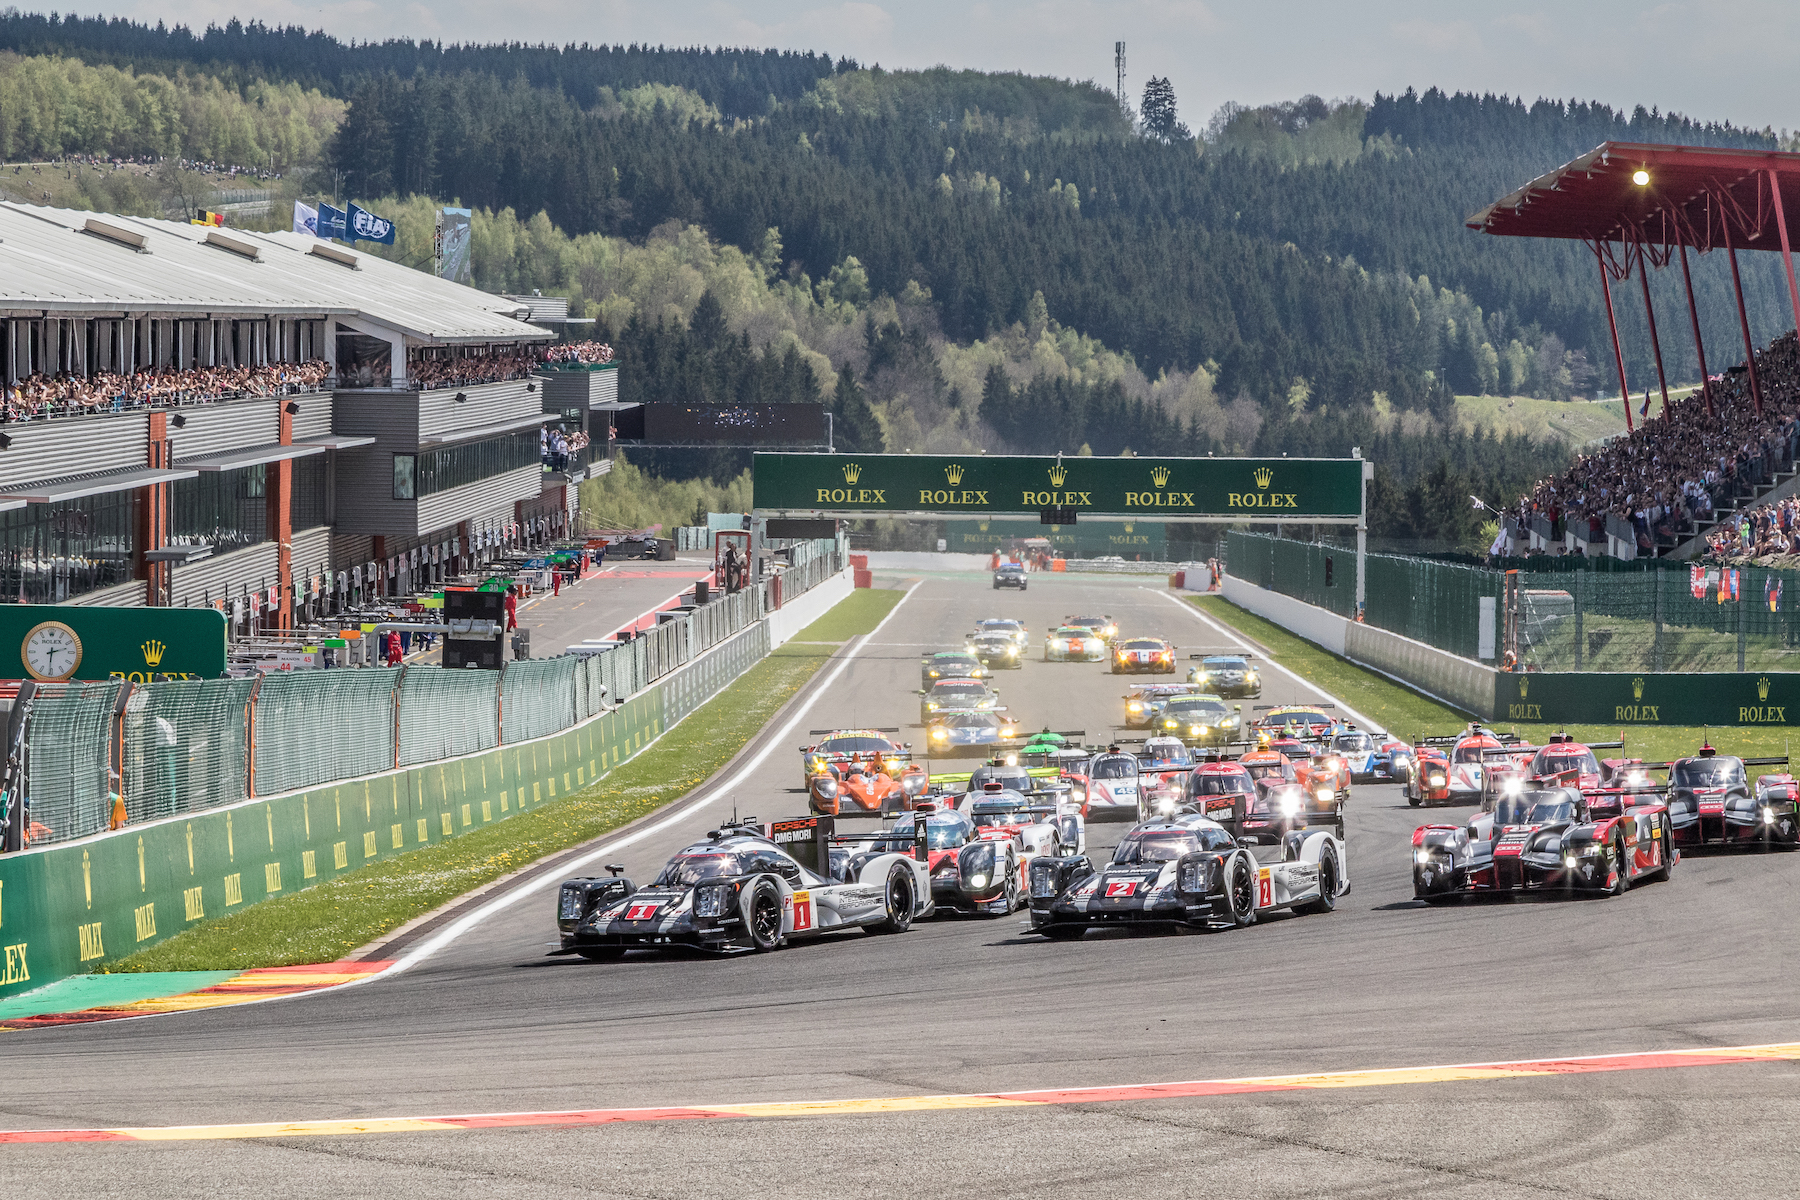 Race Start at the WEC 6 Hours of Spa - Circuit de Spa-Francorchamps - Spa - Belgium